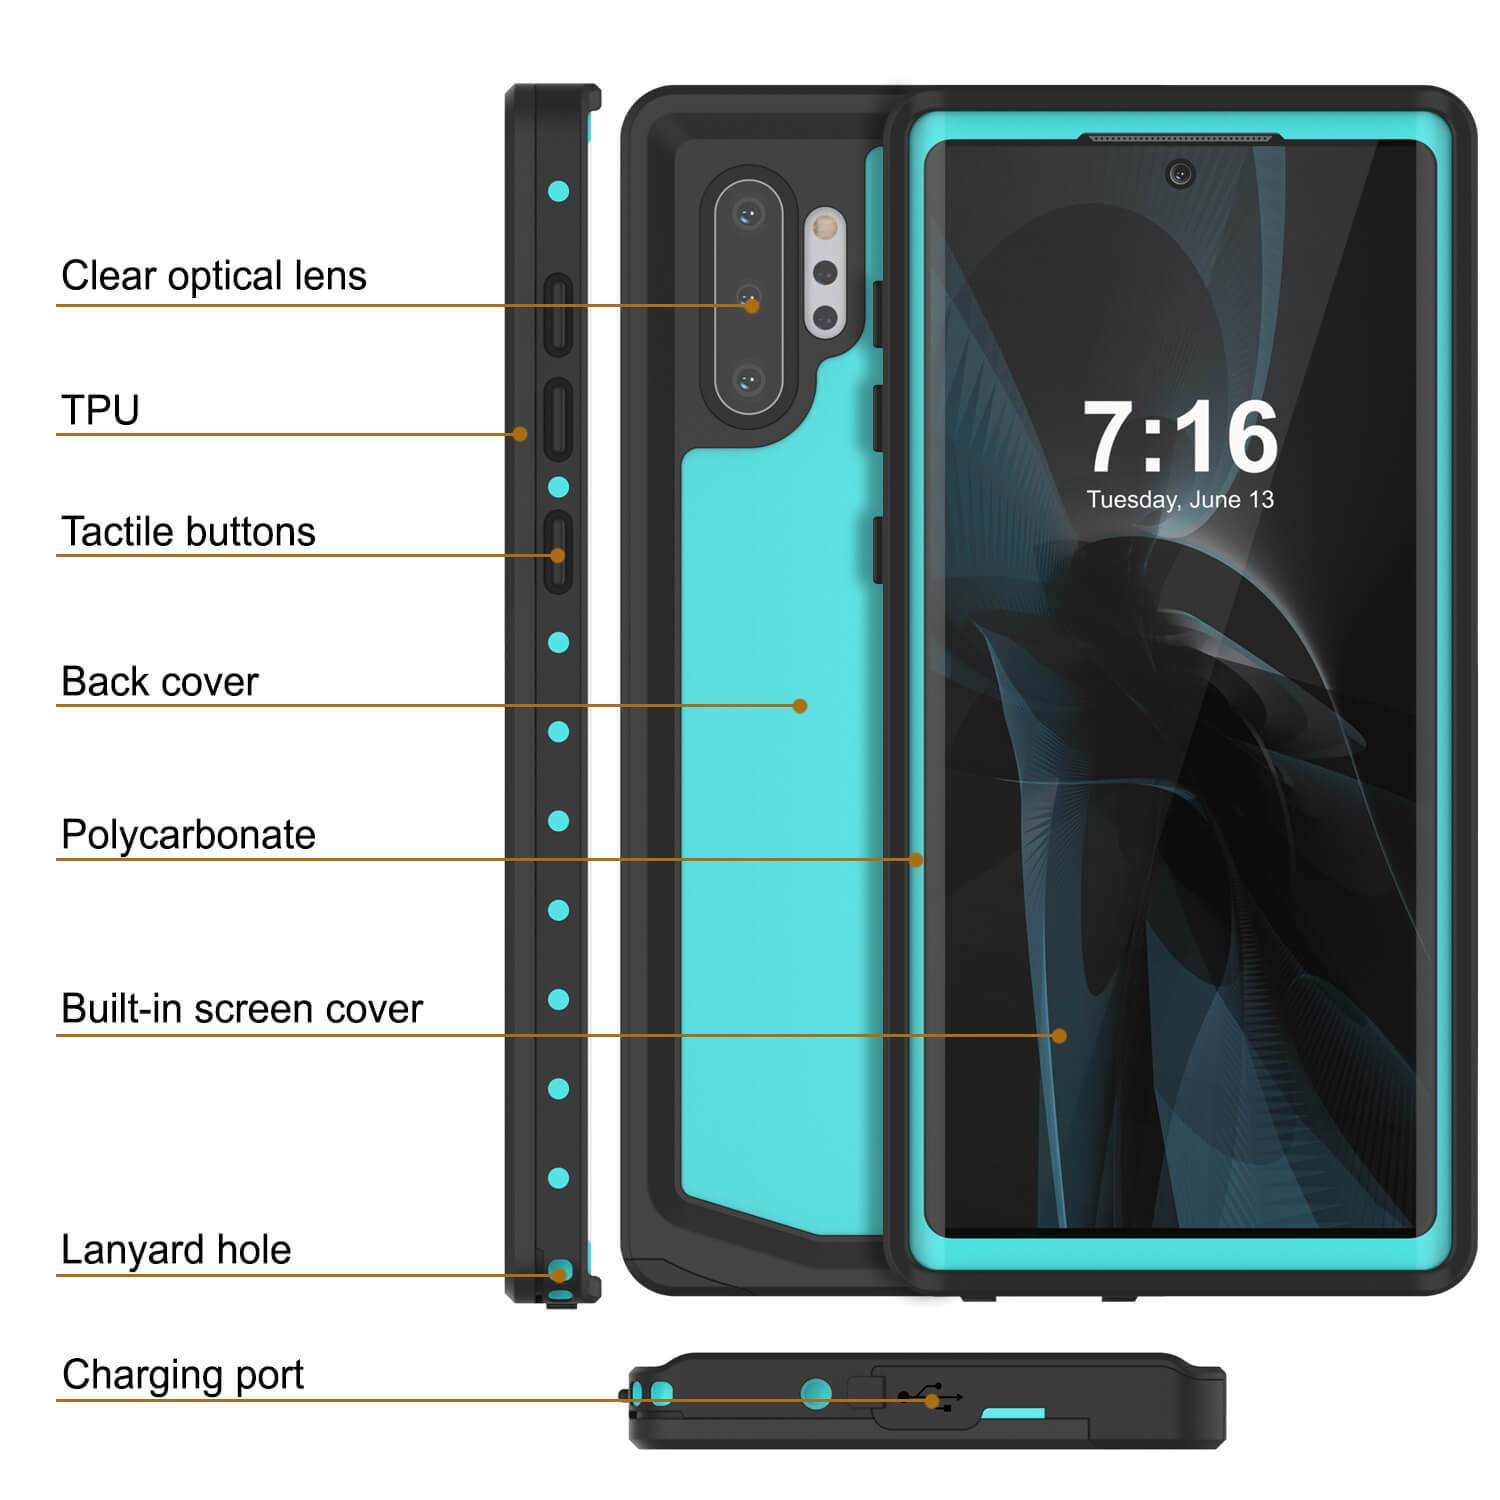 Galaxy Note 10+ Plus Waterproof Case, Punkcase Studstar Series Teal Thin Armor Cover